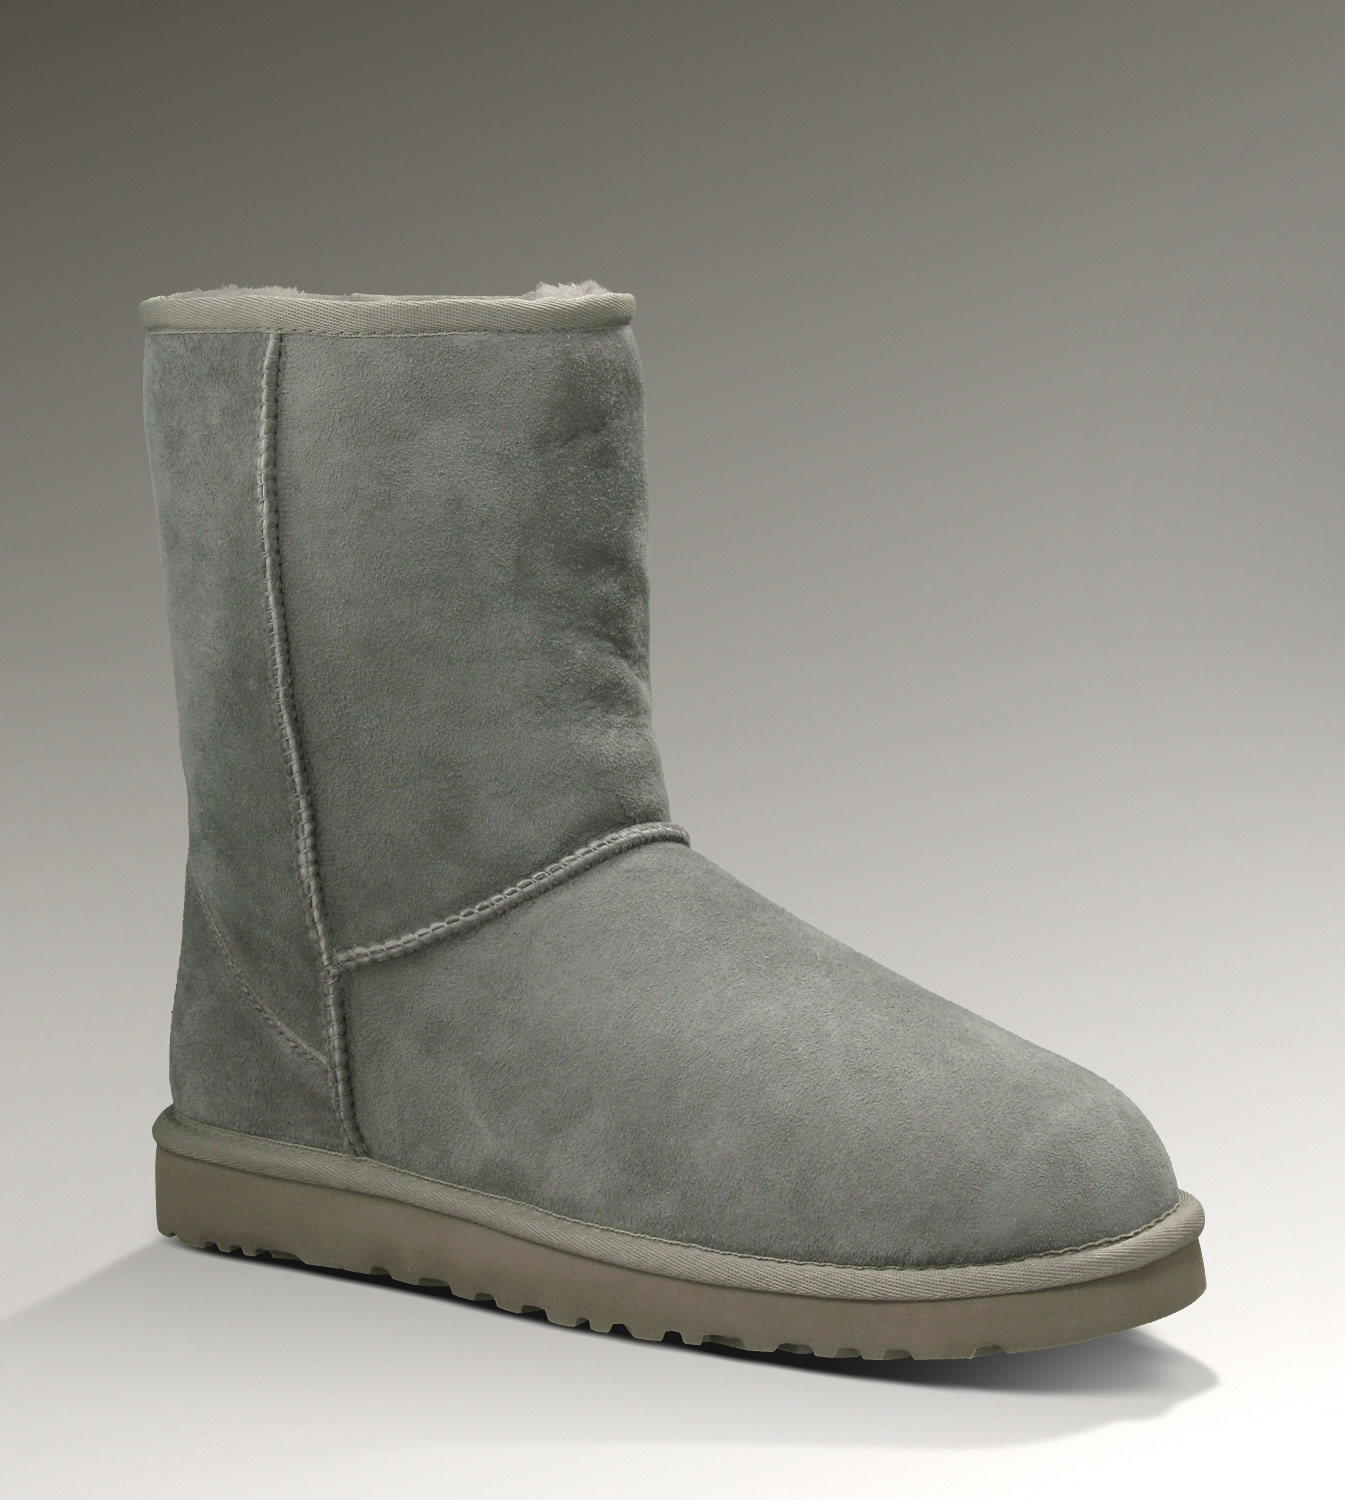 Ugg Outlet Classic Short Grey Boots 094137